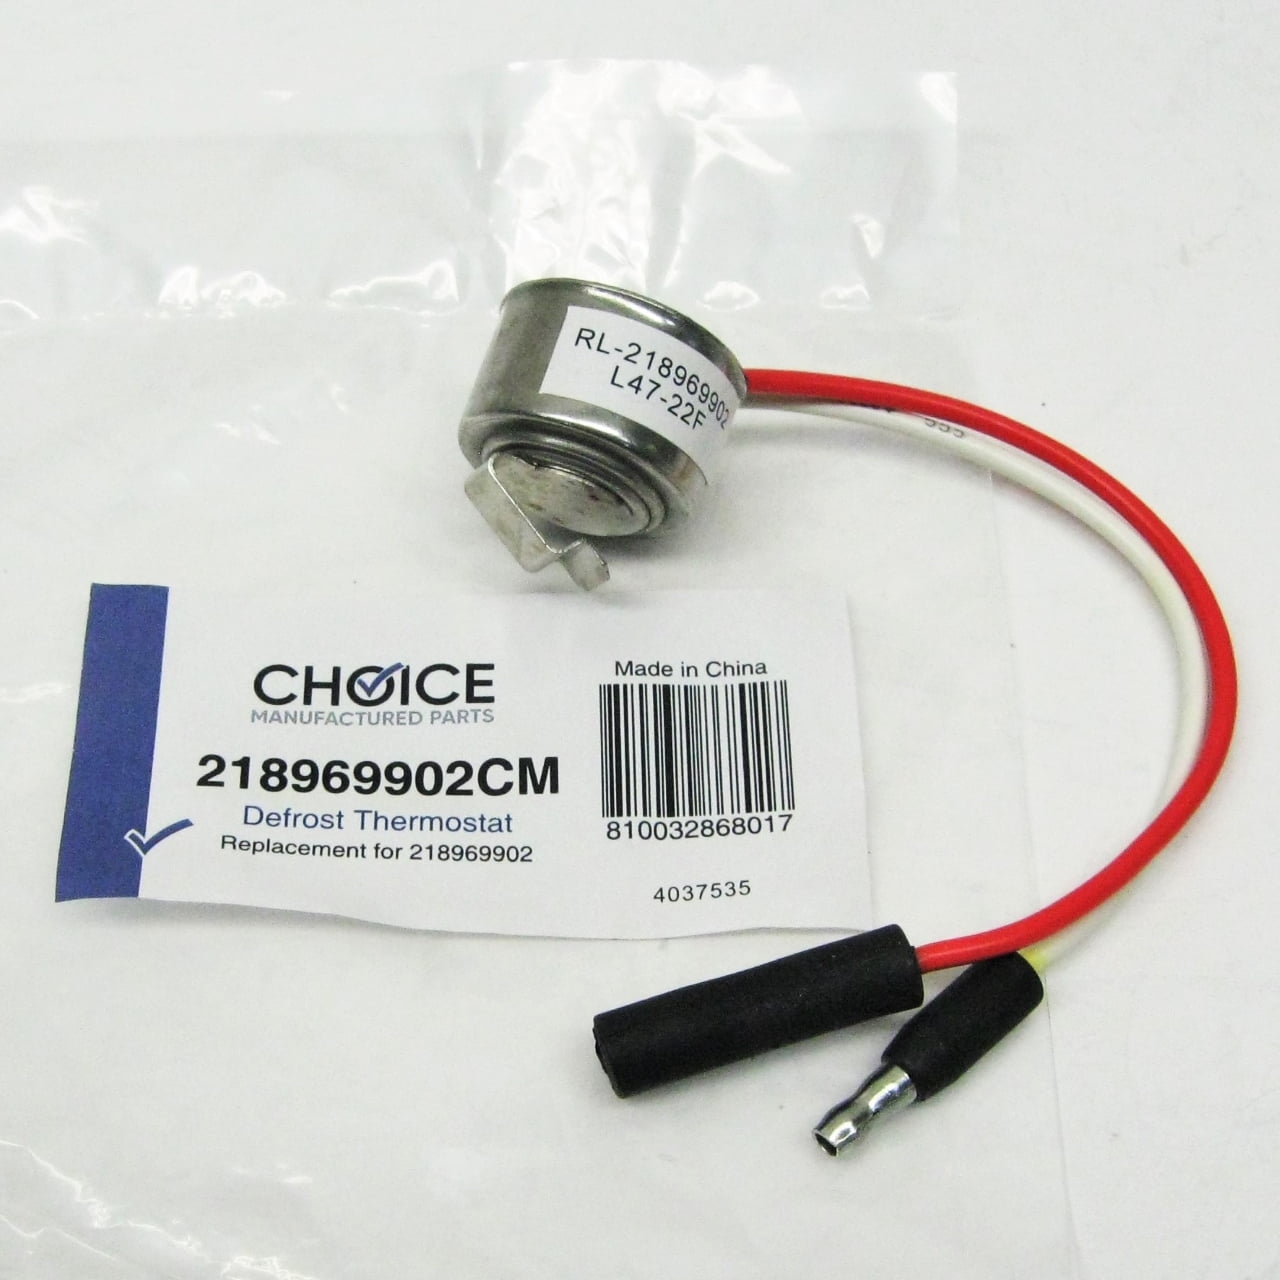 Electrolux Details about   5304464438  Refrigerator Capacitor for Frigidaire 